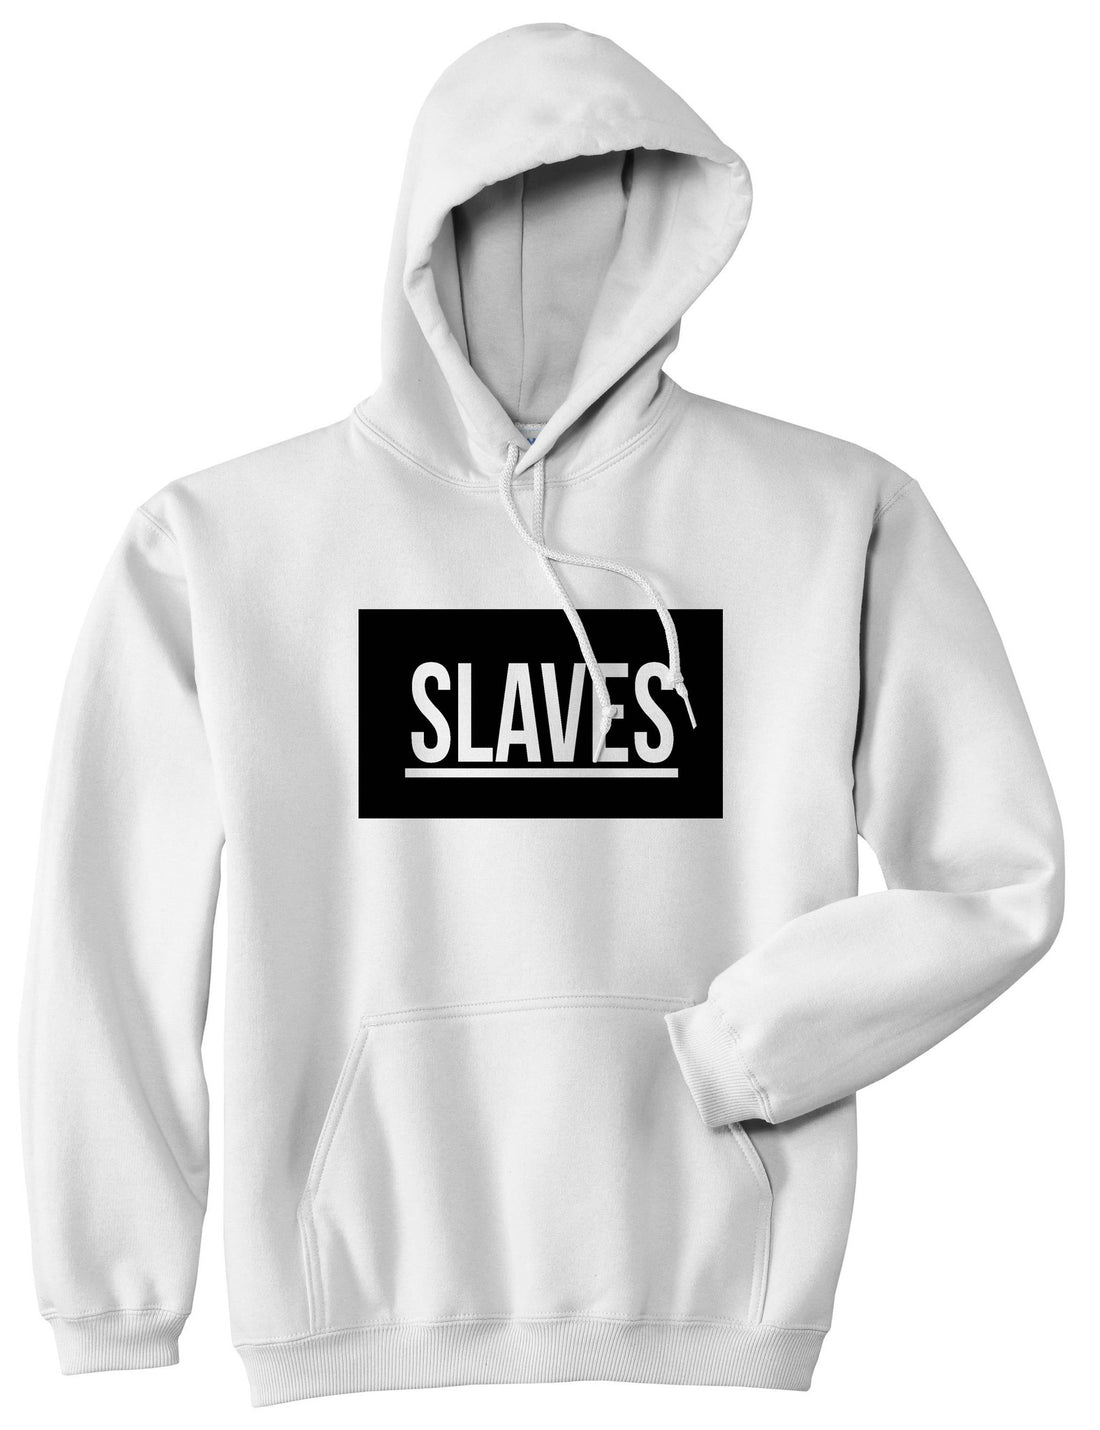 Slaves Fashion Kanye Lyrics Music West East Boys Kids Pullover Hoodie Hoody in White by Kings Of NY